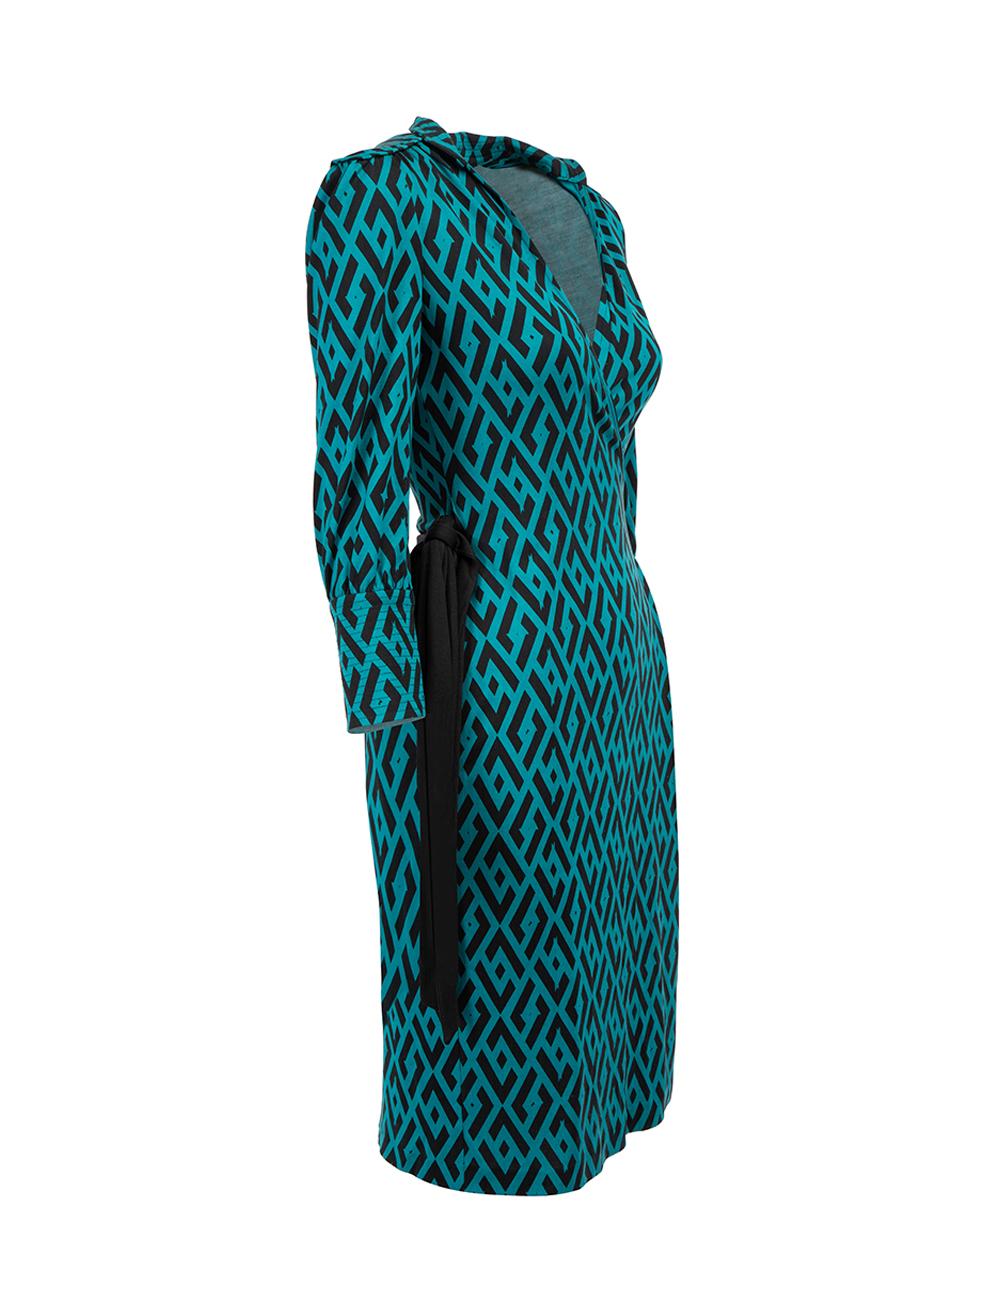 CONDITION is Very good. Hardly any visible wear to dress is evident on this used Diane Von Furstenberg designer resale item.



Details


Teal and black 

Silk

Wrap dress

Abstract diamond print

Mini length

3/4 Length sleeves





Made in